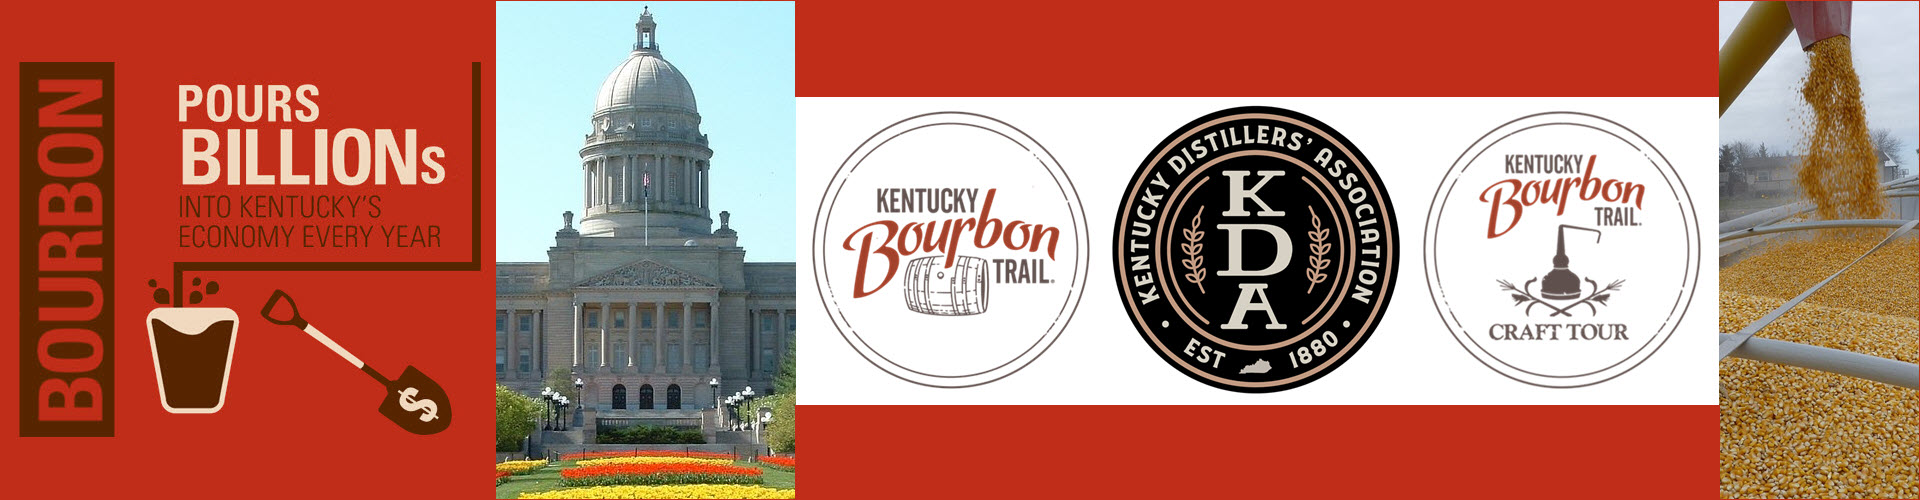 Kentucky Distilleries' Association - Bourbon, It's More Than a Drink, Bourbon's 10 Year Journey to Pouring $9 Billion into State's Economy